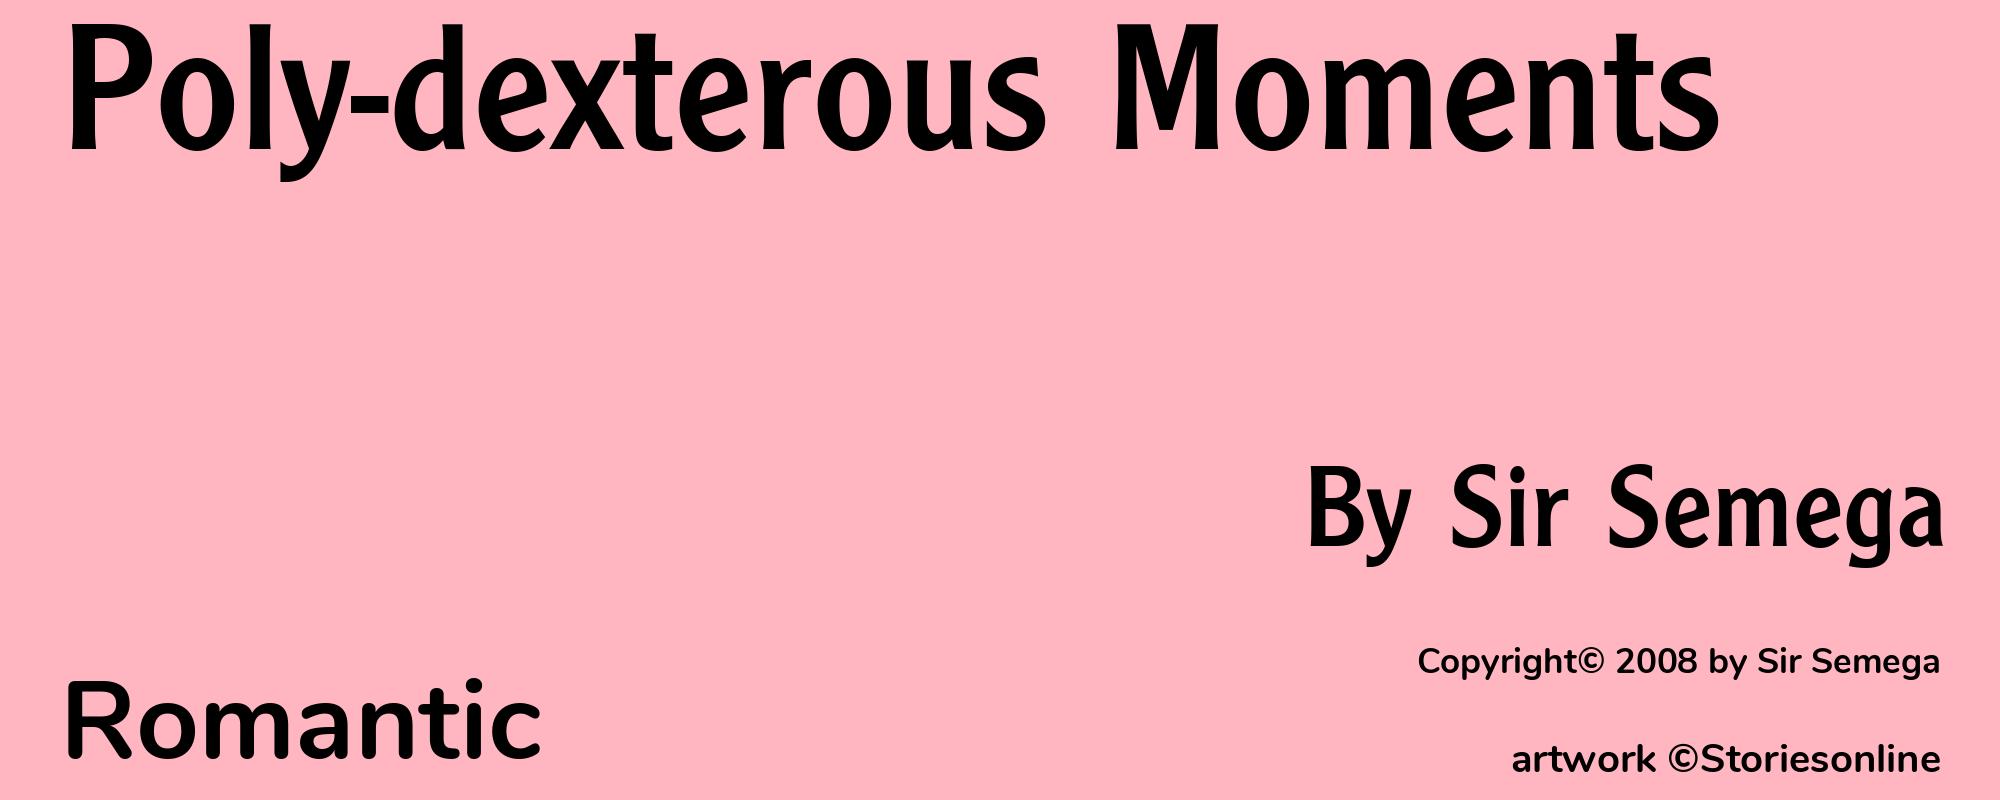 Poly-dexterous Moments - Cover